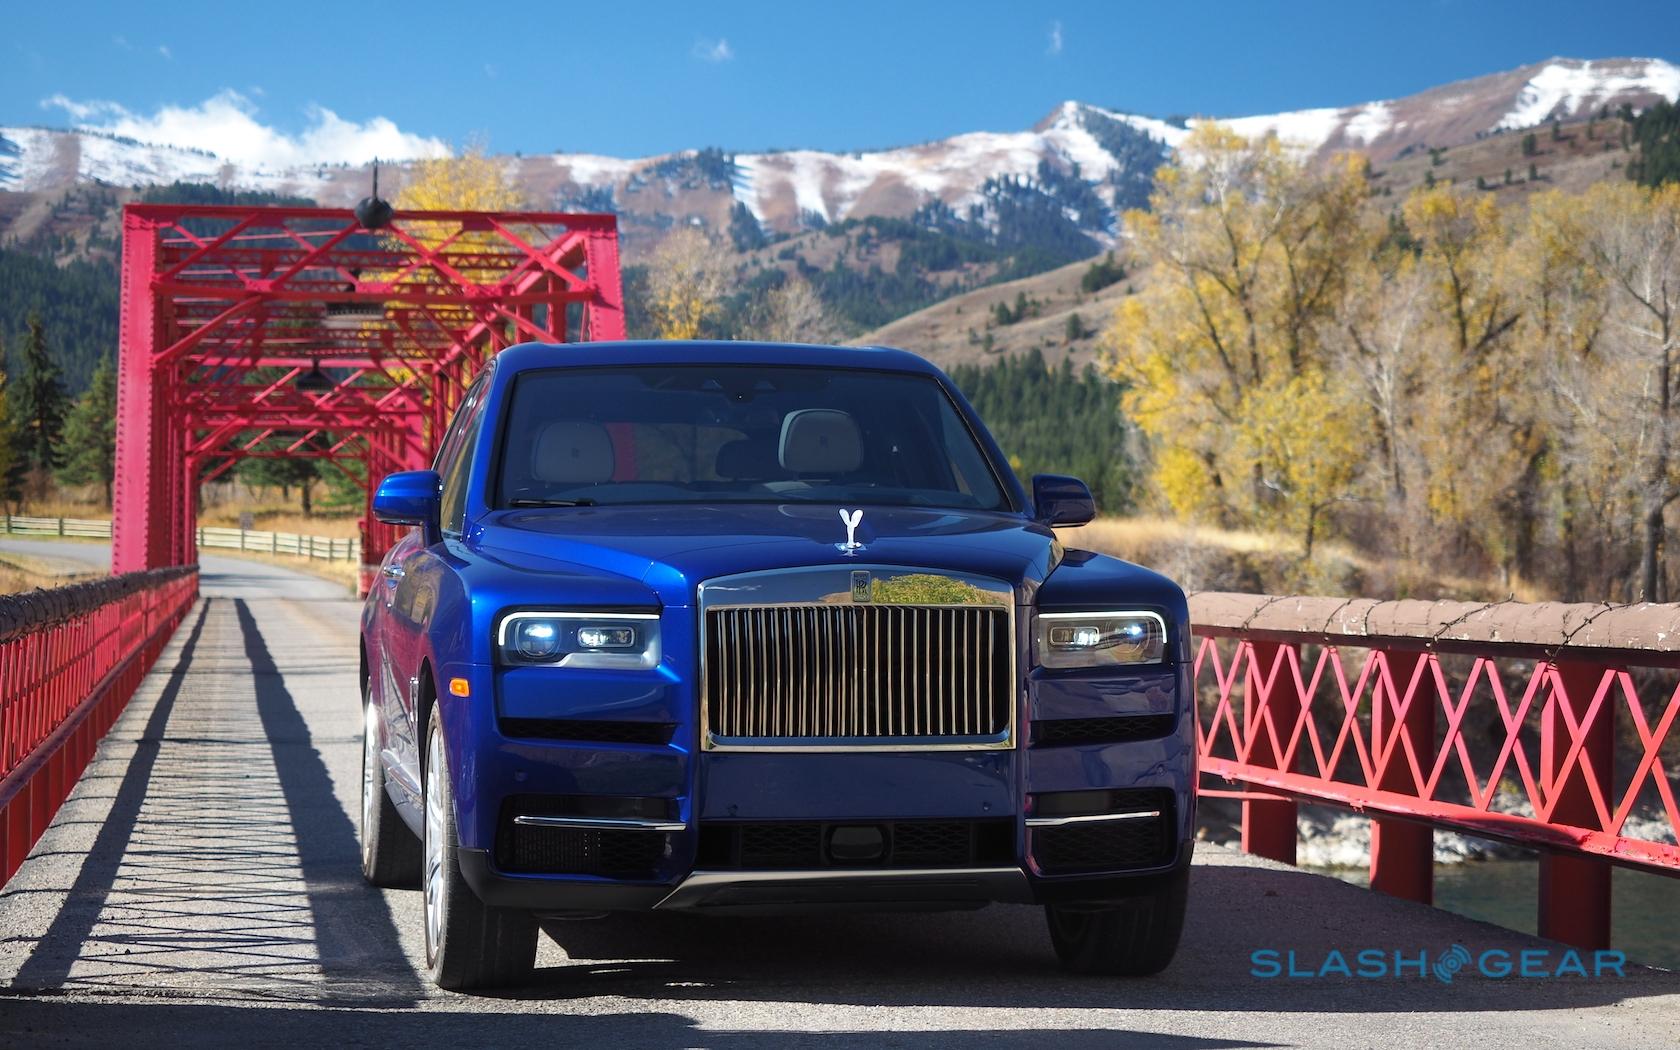 Rolls Royce Cullinan First Drive: Excess Comes With A Surprise